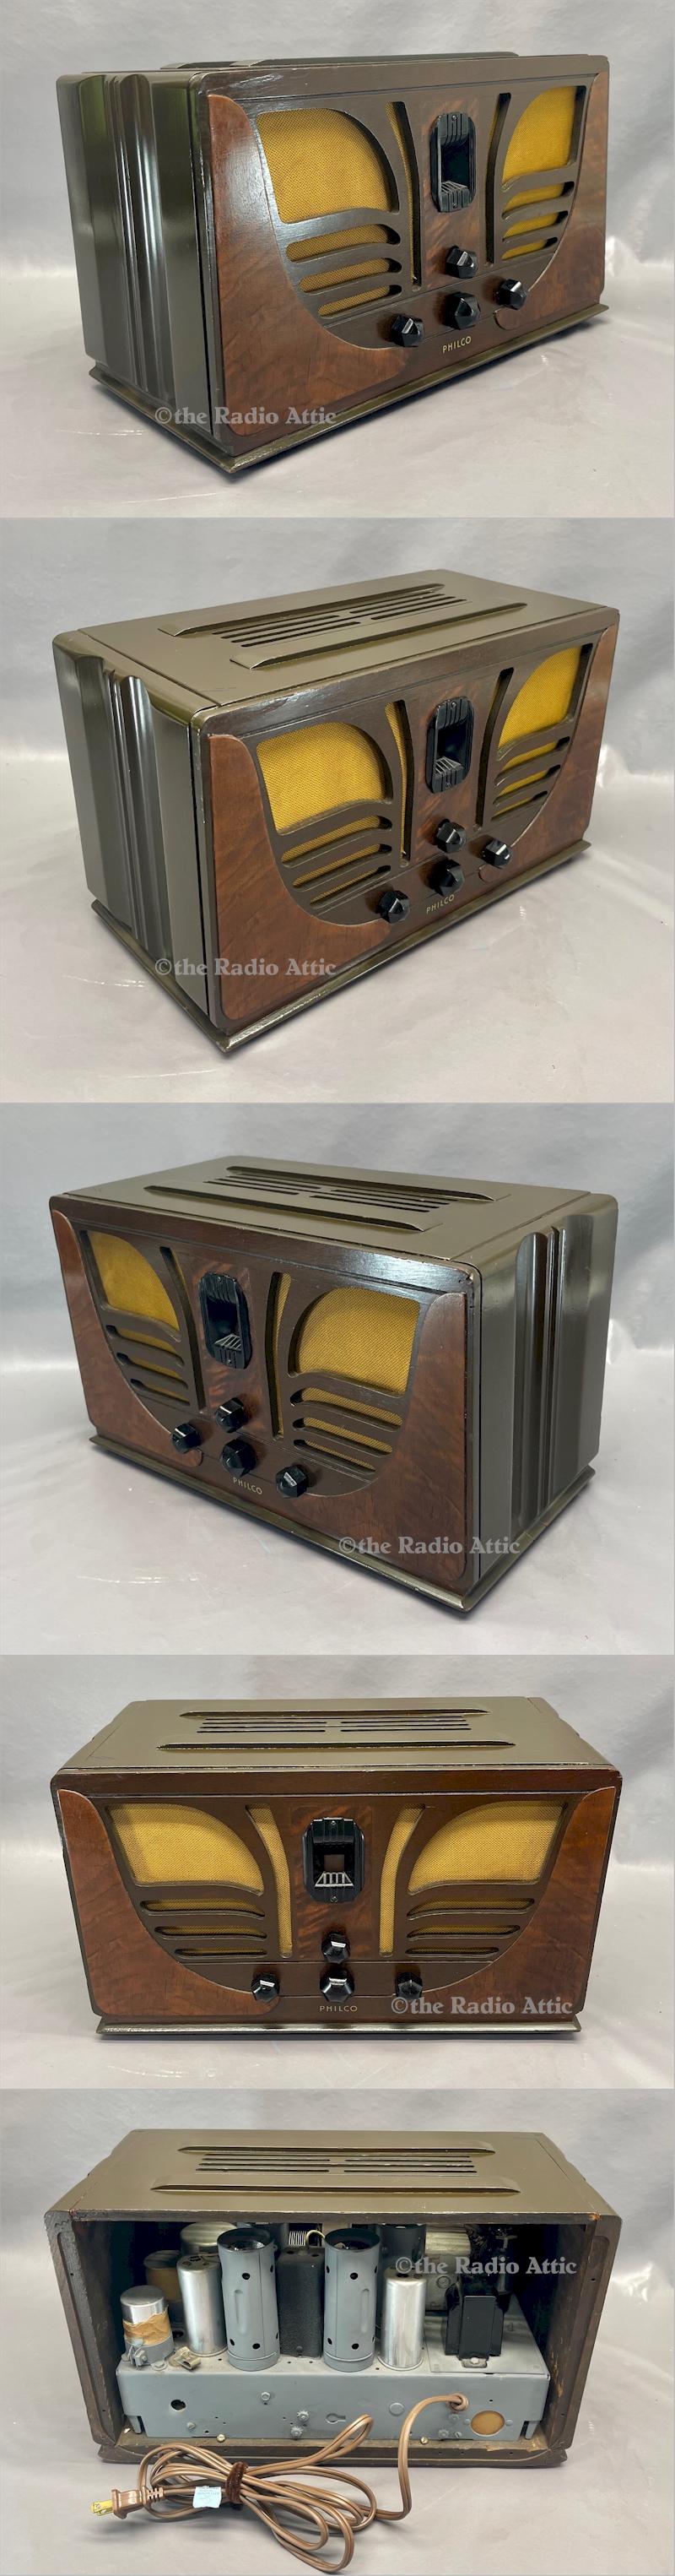 Philco 45 "Butterfly" (1935)